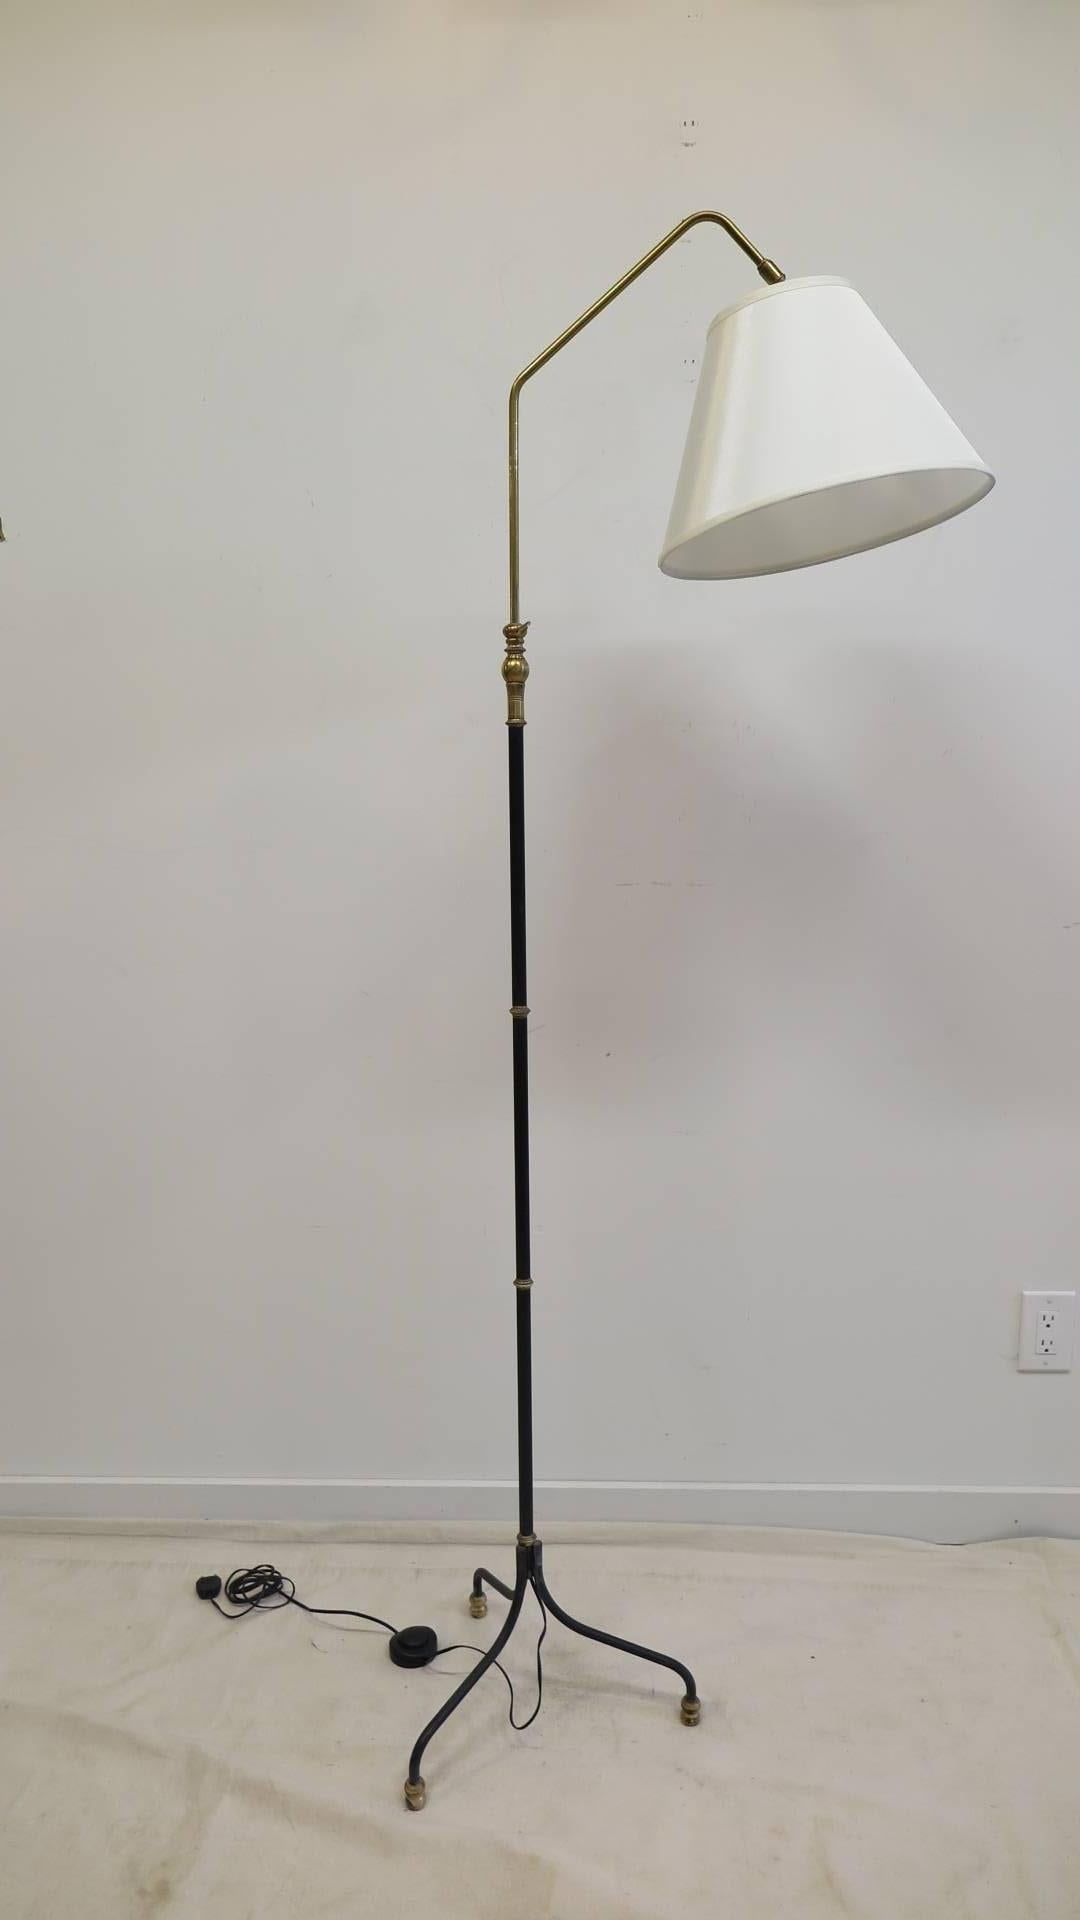 A 1950 iron and brass articulating French floor lamp in the style of Jean Royere. The shade has circular movement allowing a 3/4 angle, with adjustable height from 60 to 78 inches. Shade is silk measuring at 6 T x 14 B x10 slant. Very good